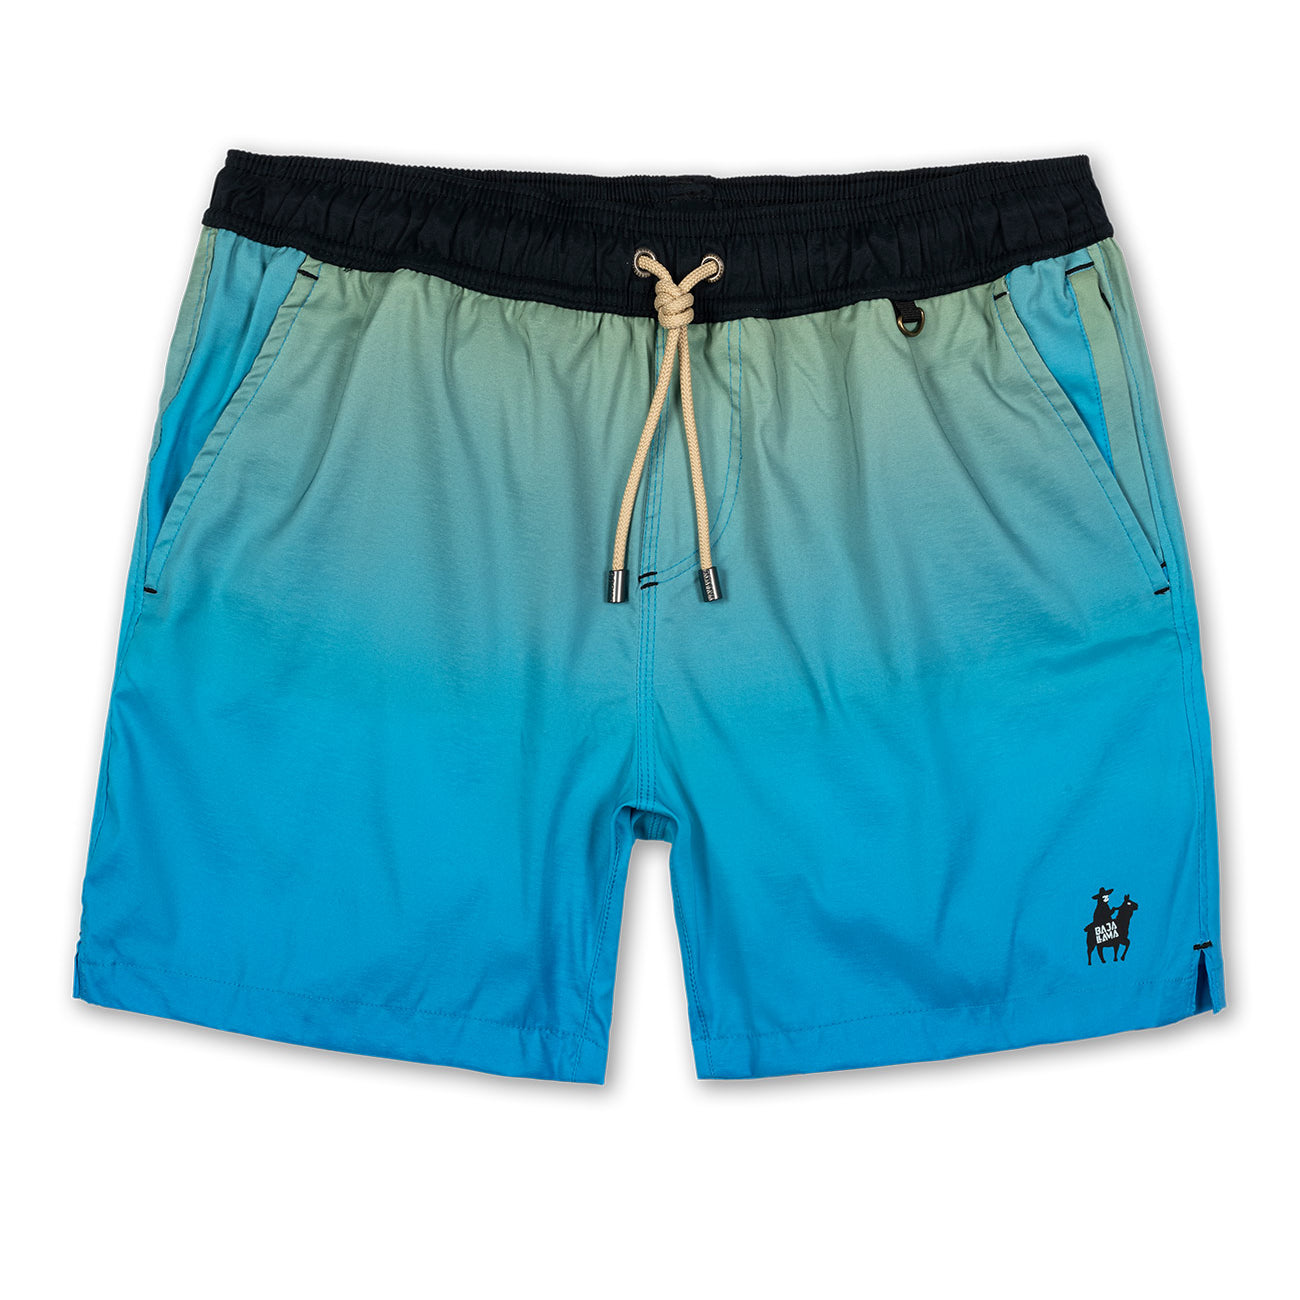 Ocean-inspired gradient print mens stretch swimsuit featuring embroidered baja llama logo.